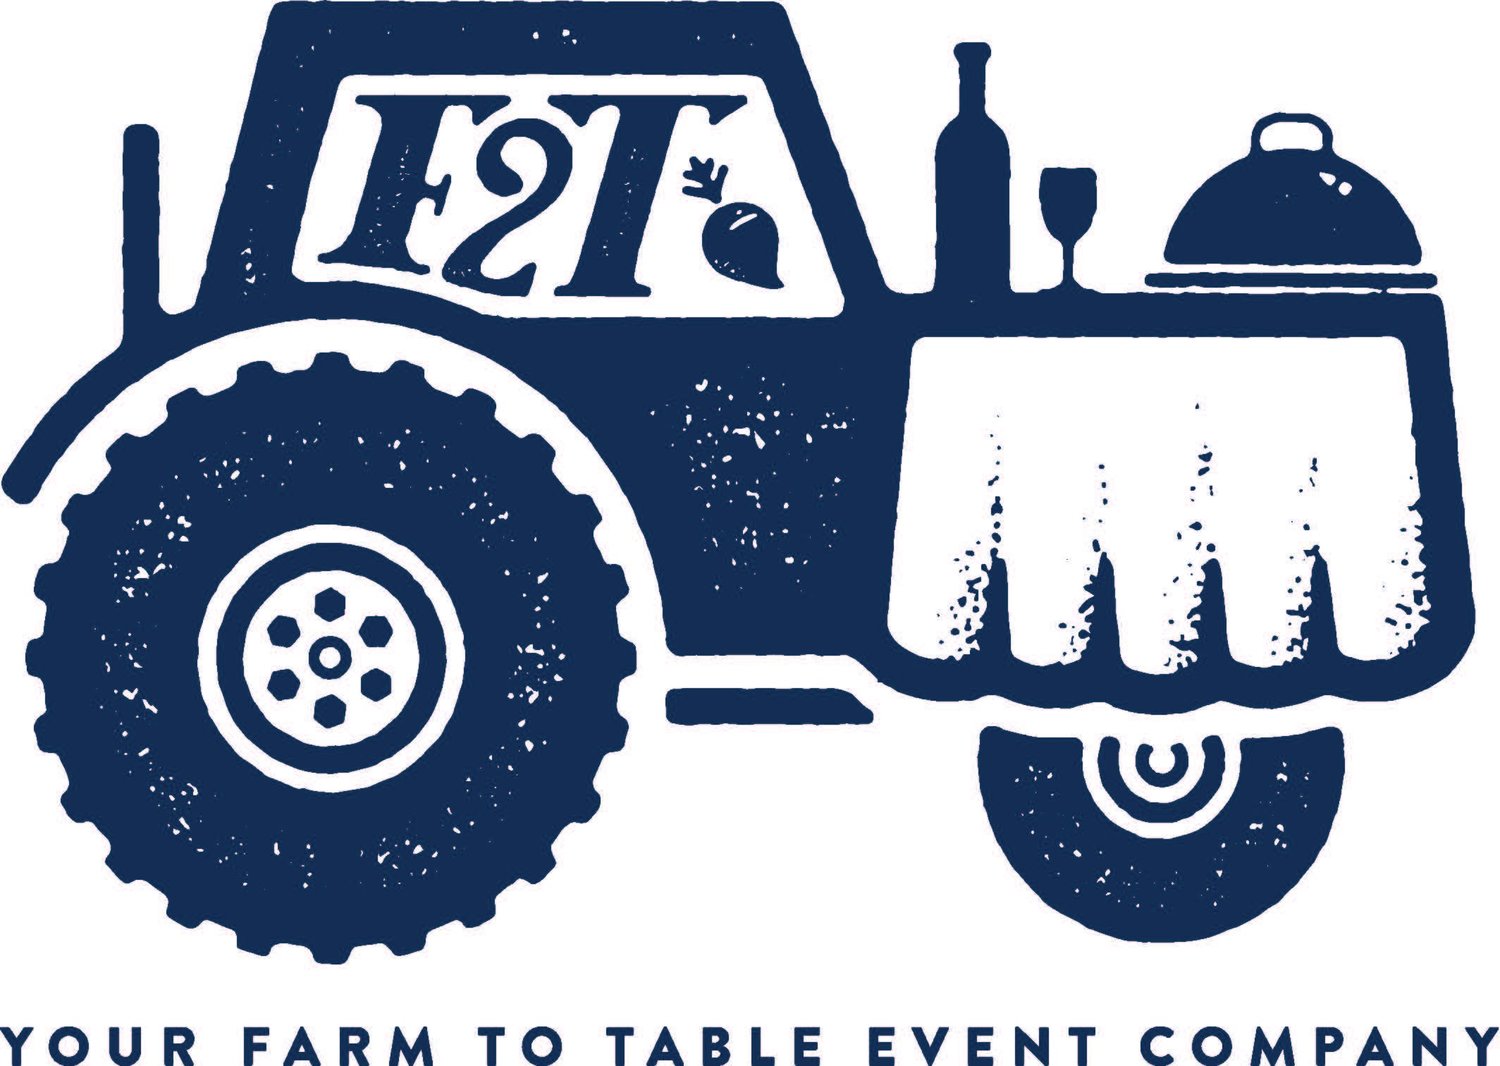 f2t tractor illustation with the hood set like a dining table with tablecloth bottle of wine and glass and covered dish your farm to table event company tagline